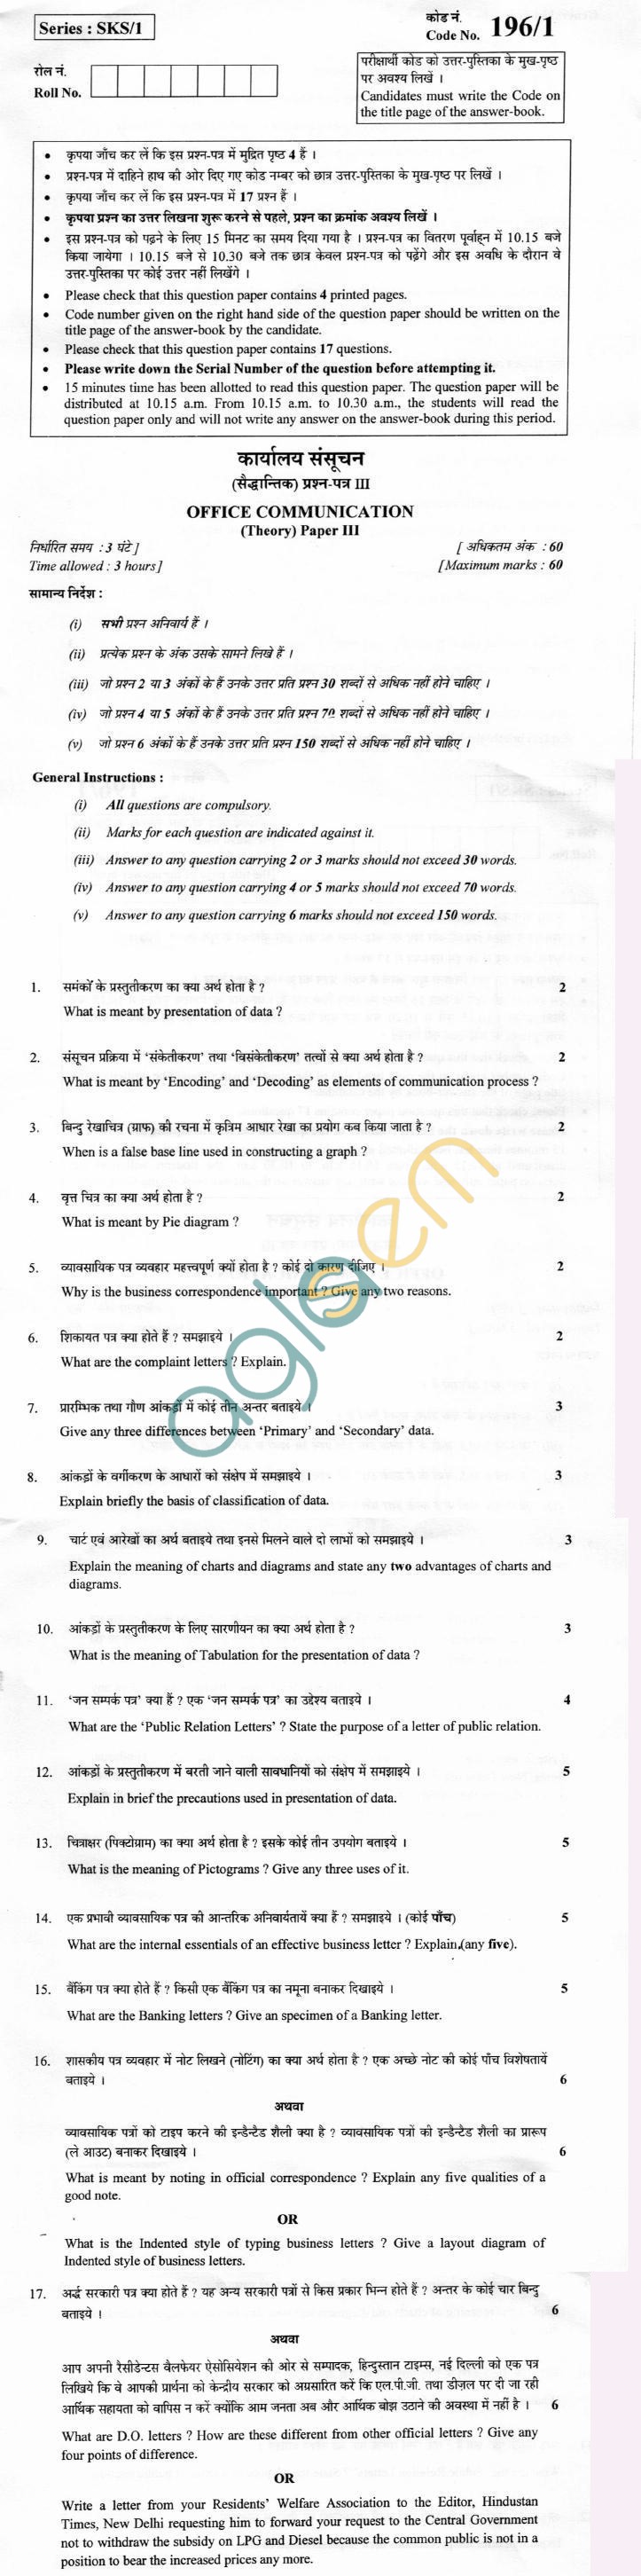 CBSE Board Exam 2013 Class XII Question Paper - Office Communication Paper III